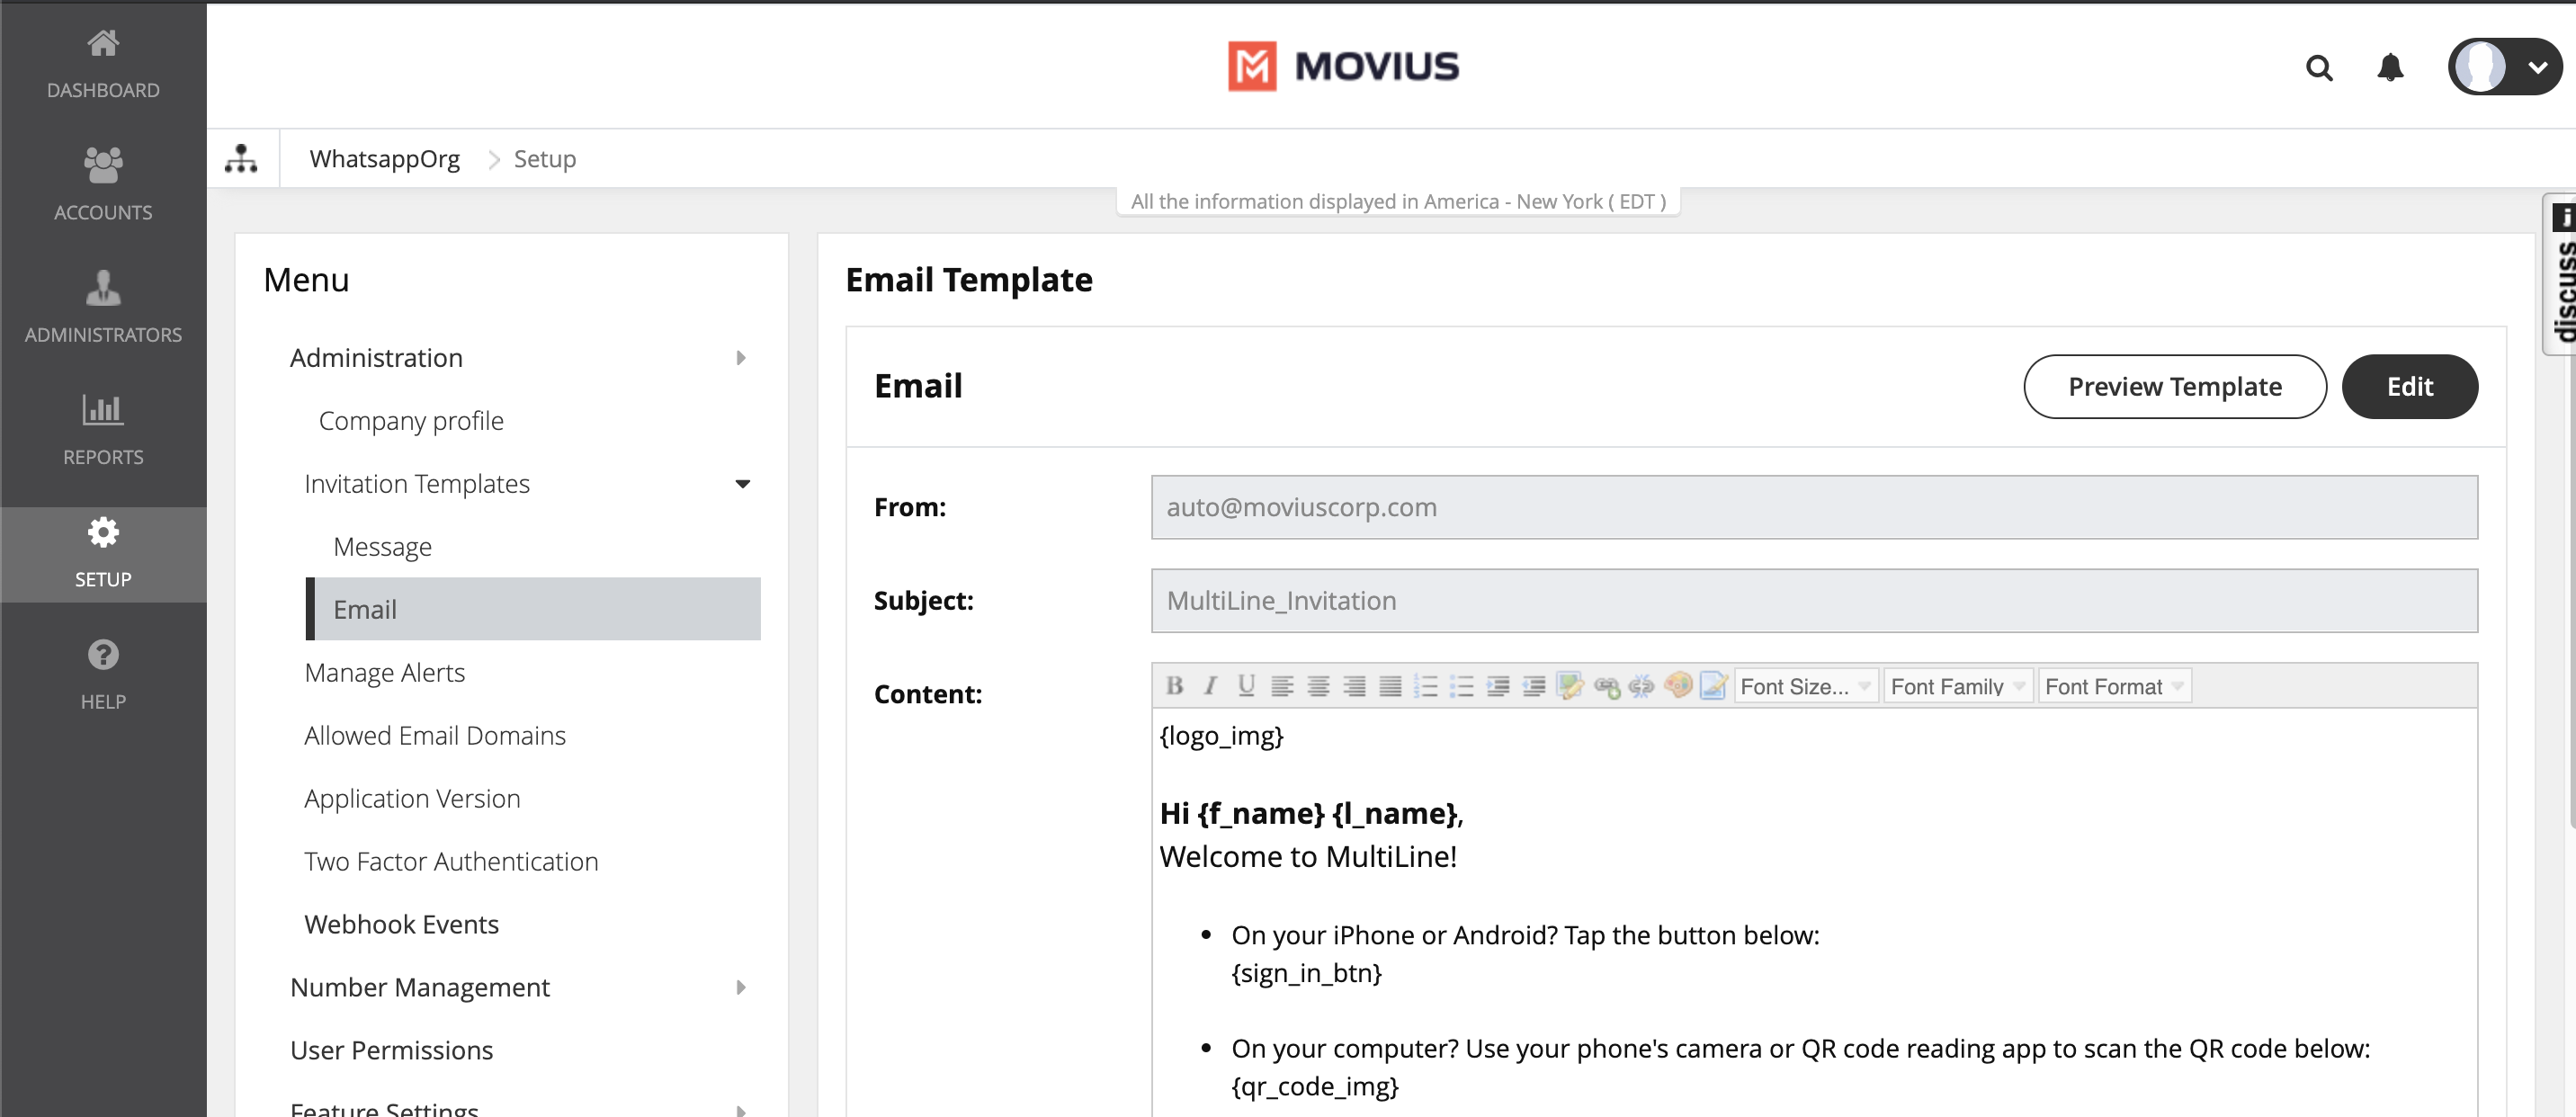 Email Template Screen